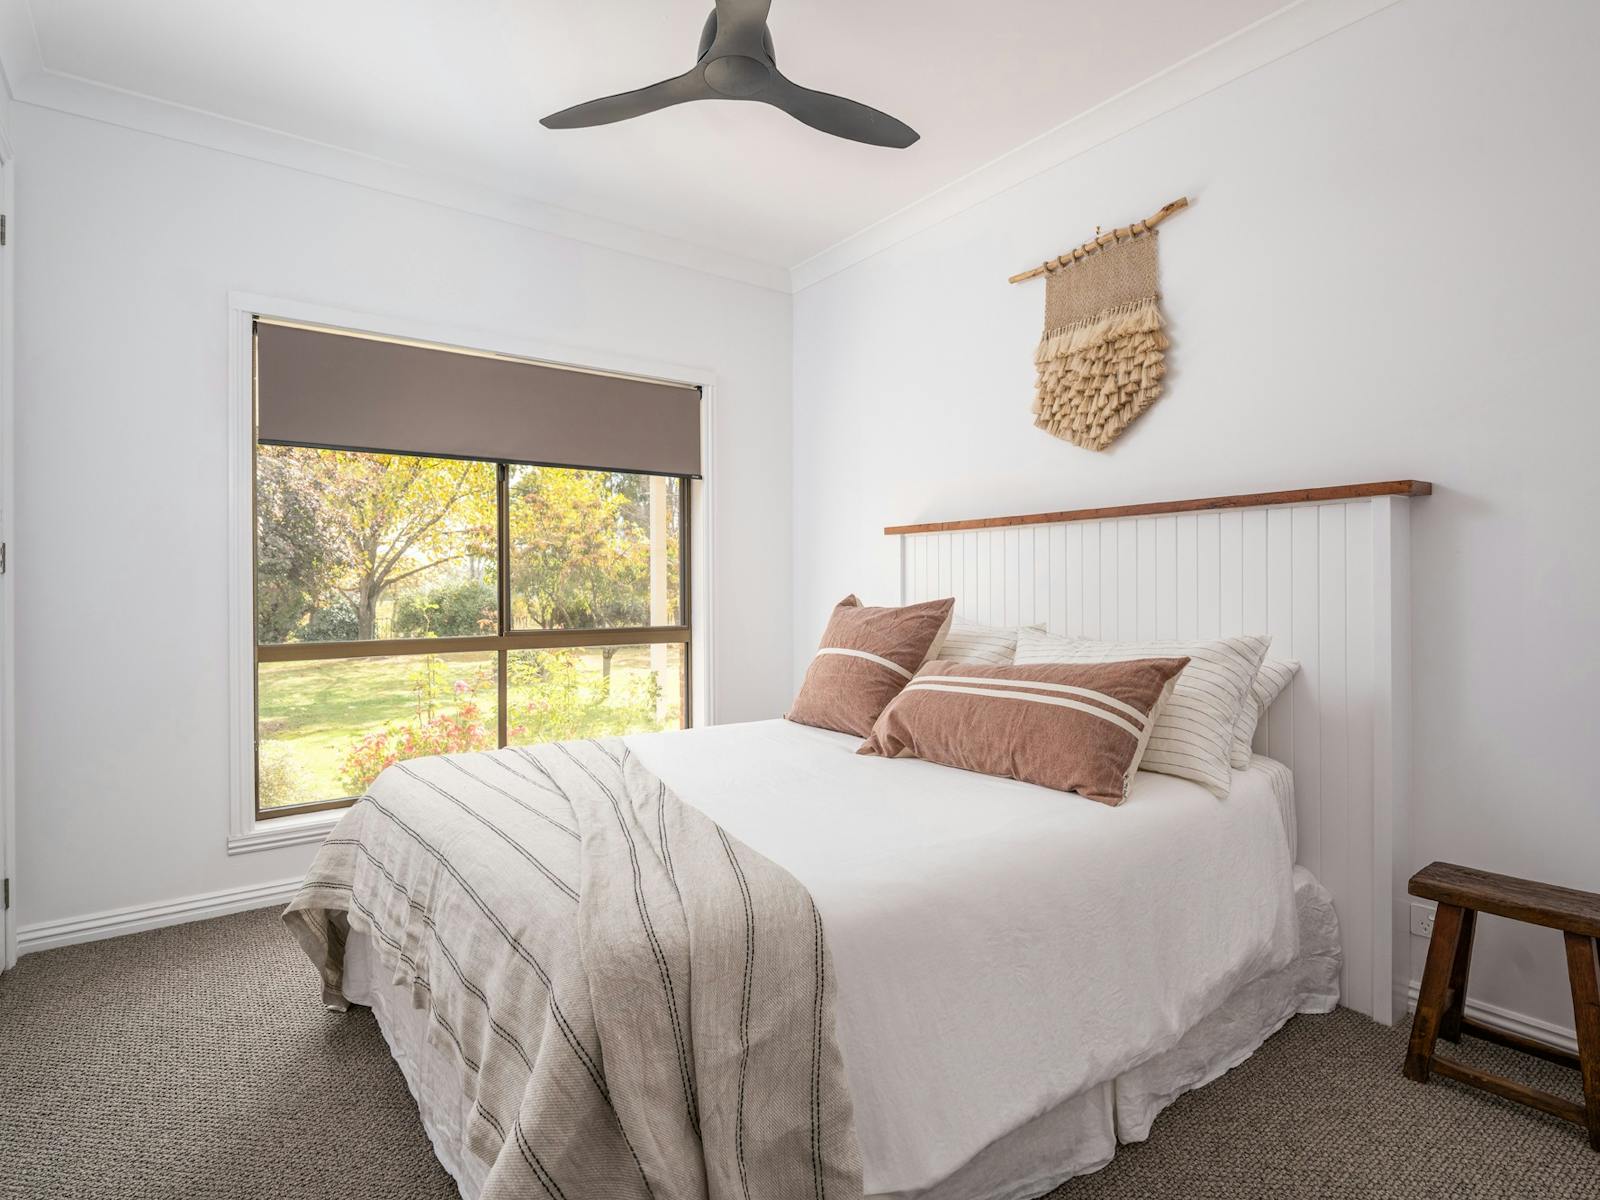 Bedroom with ceiling fan and garden view